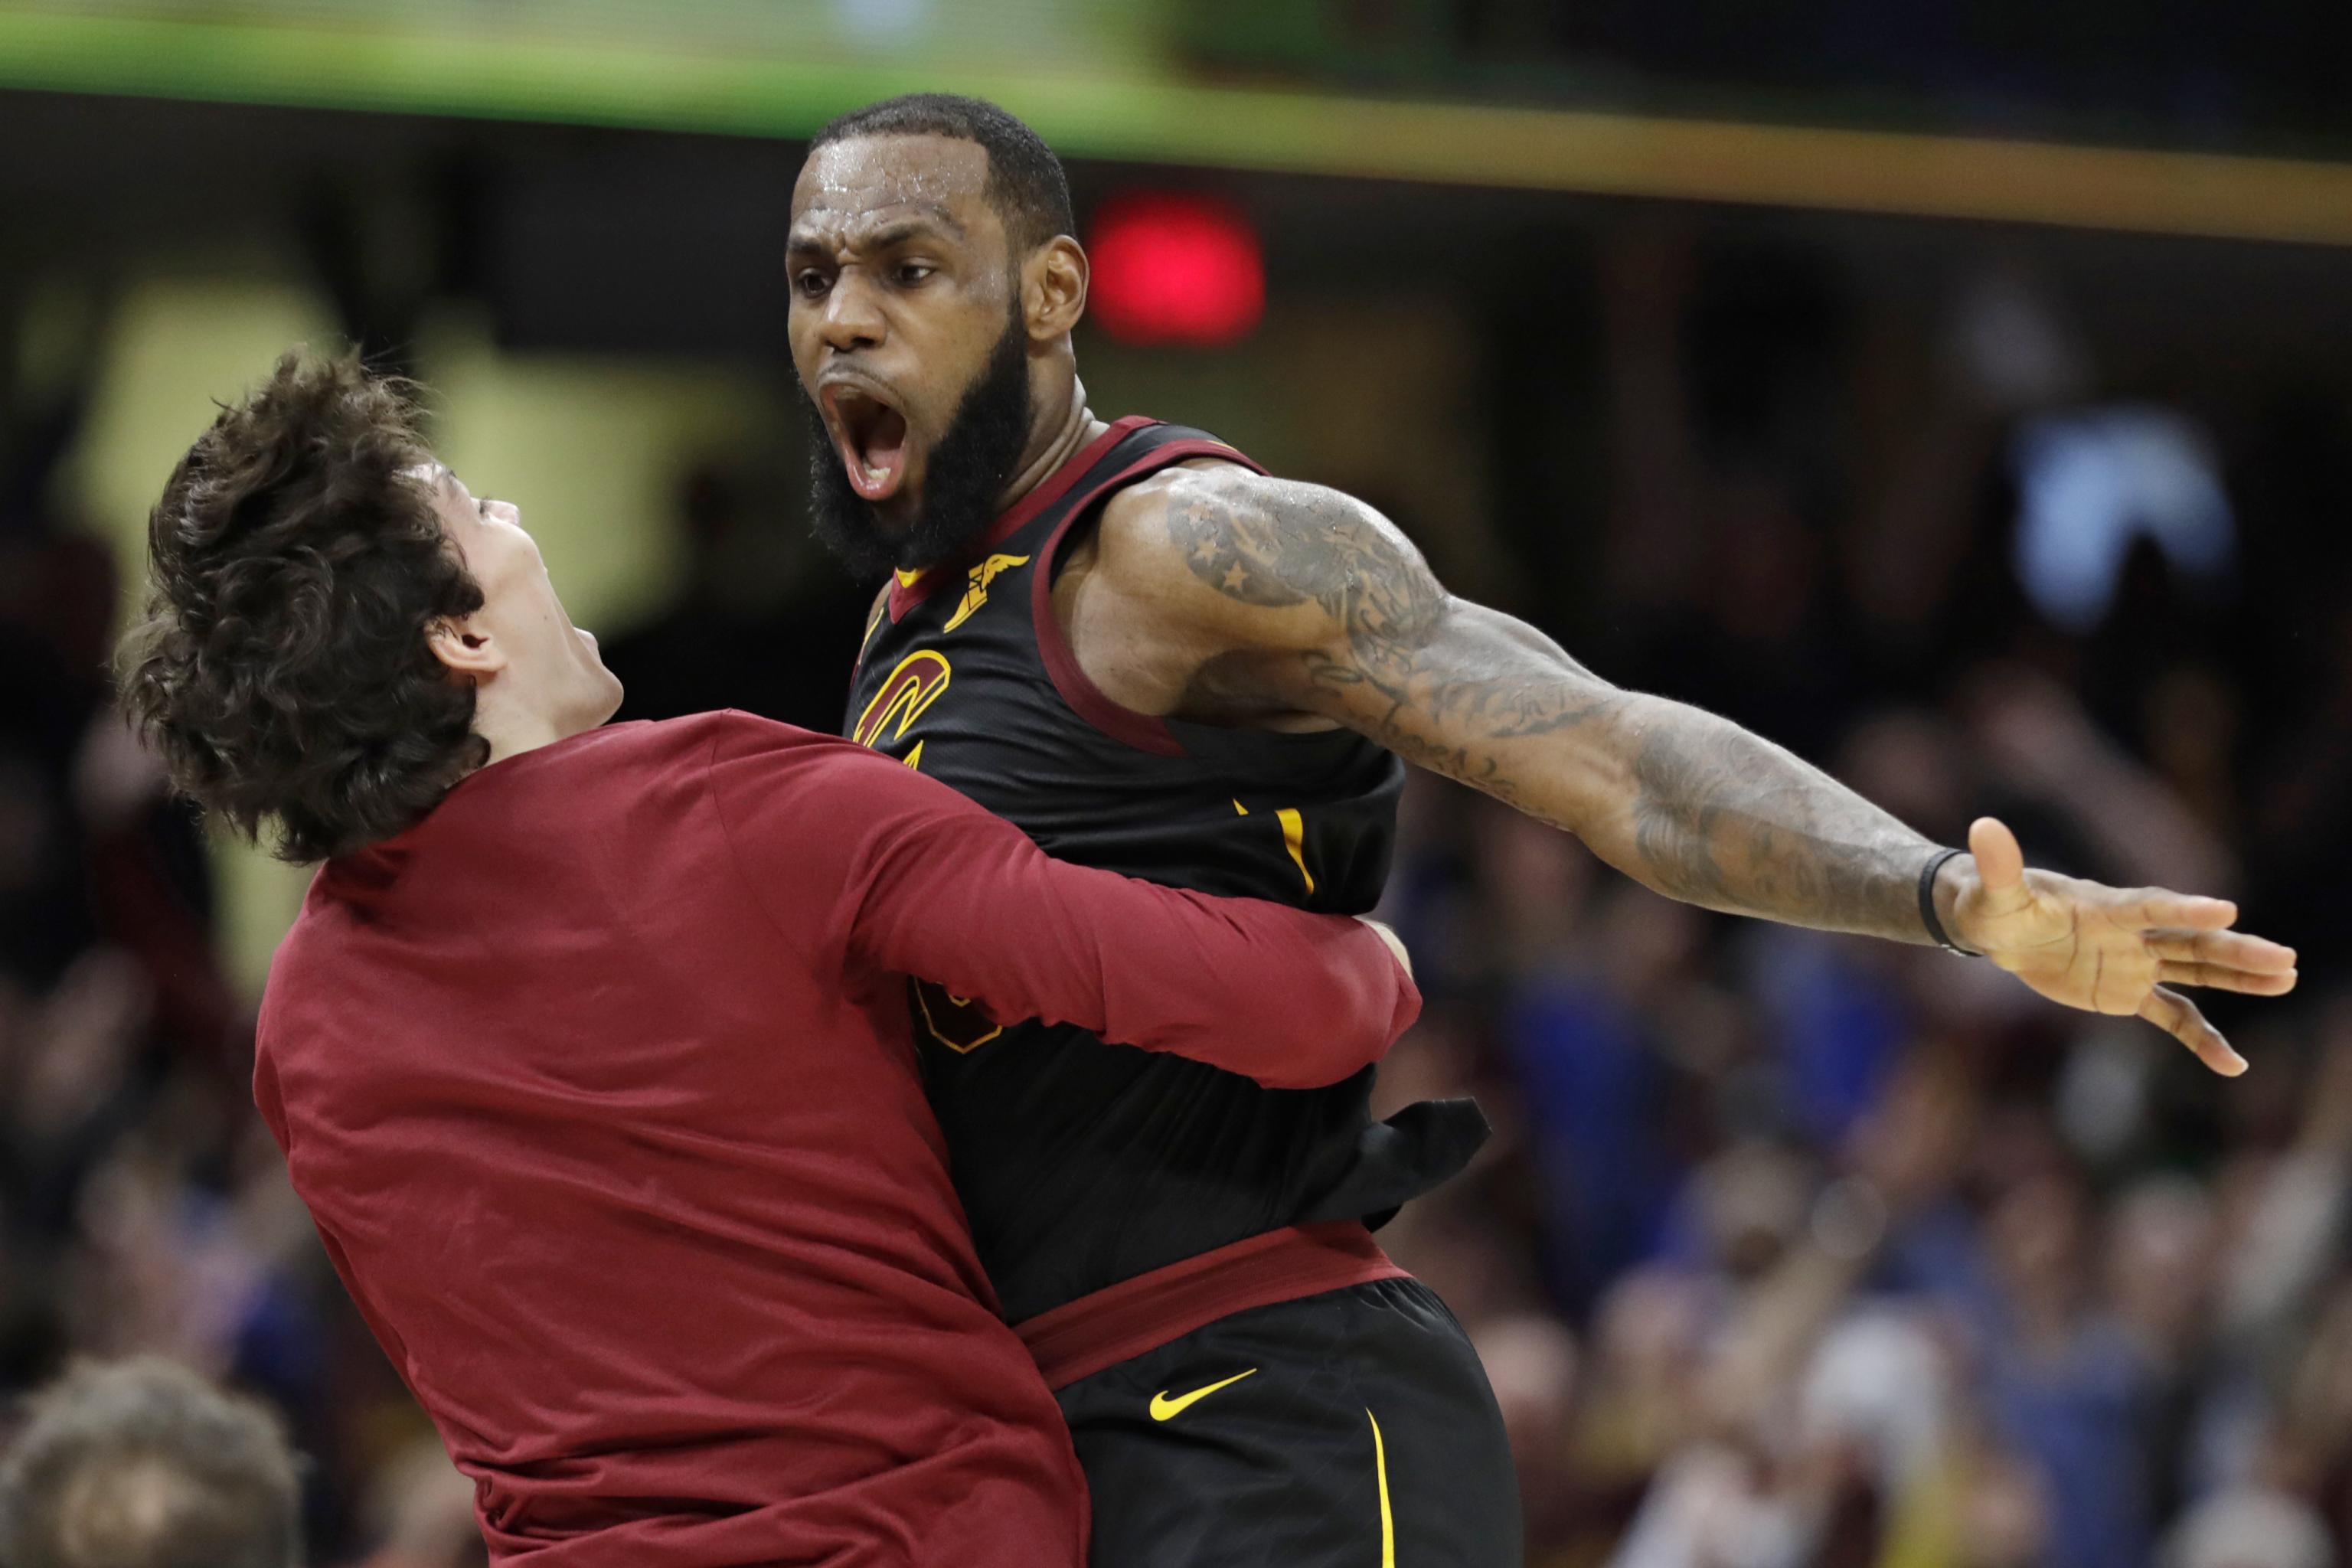 What is Cedi Osman's relationship with LeBron James? All you need to know